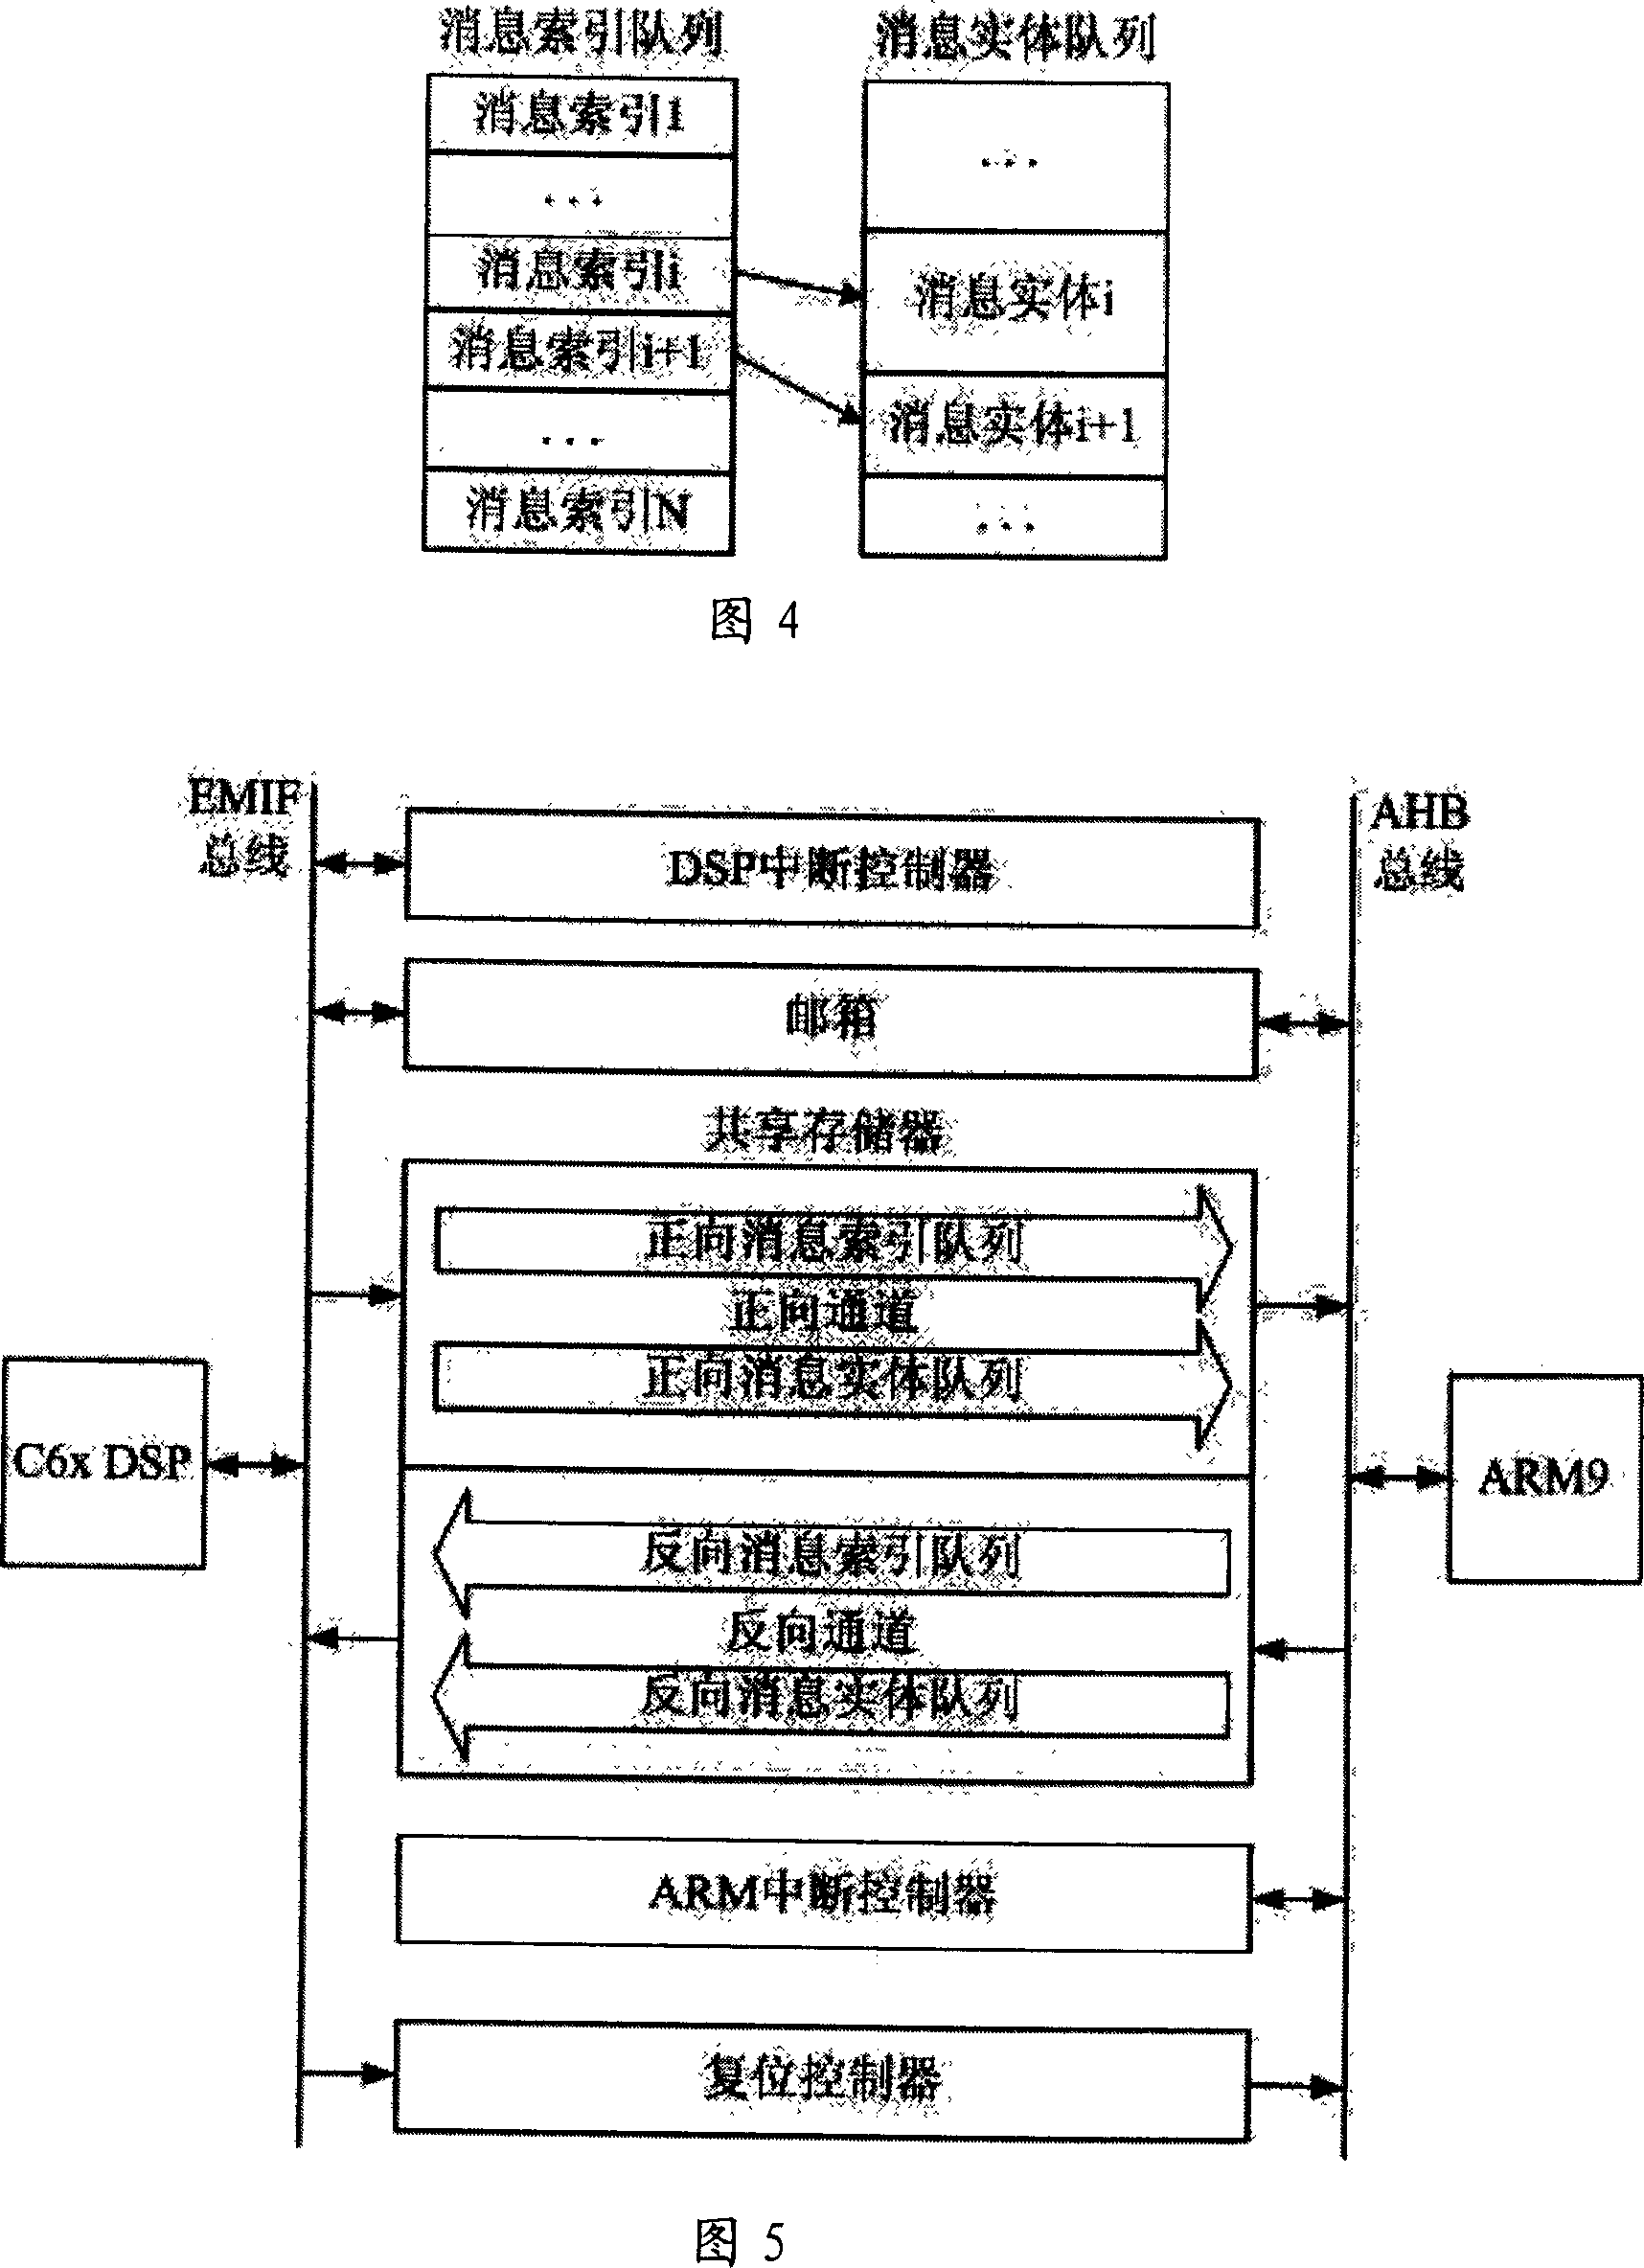 Double CPU communication method based on shared memory